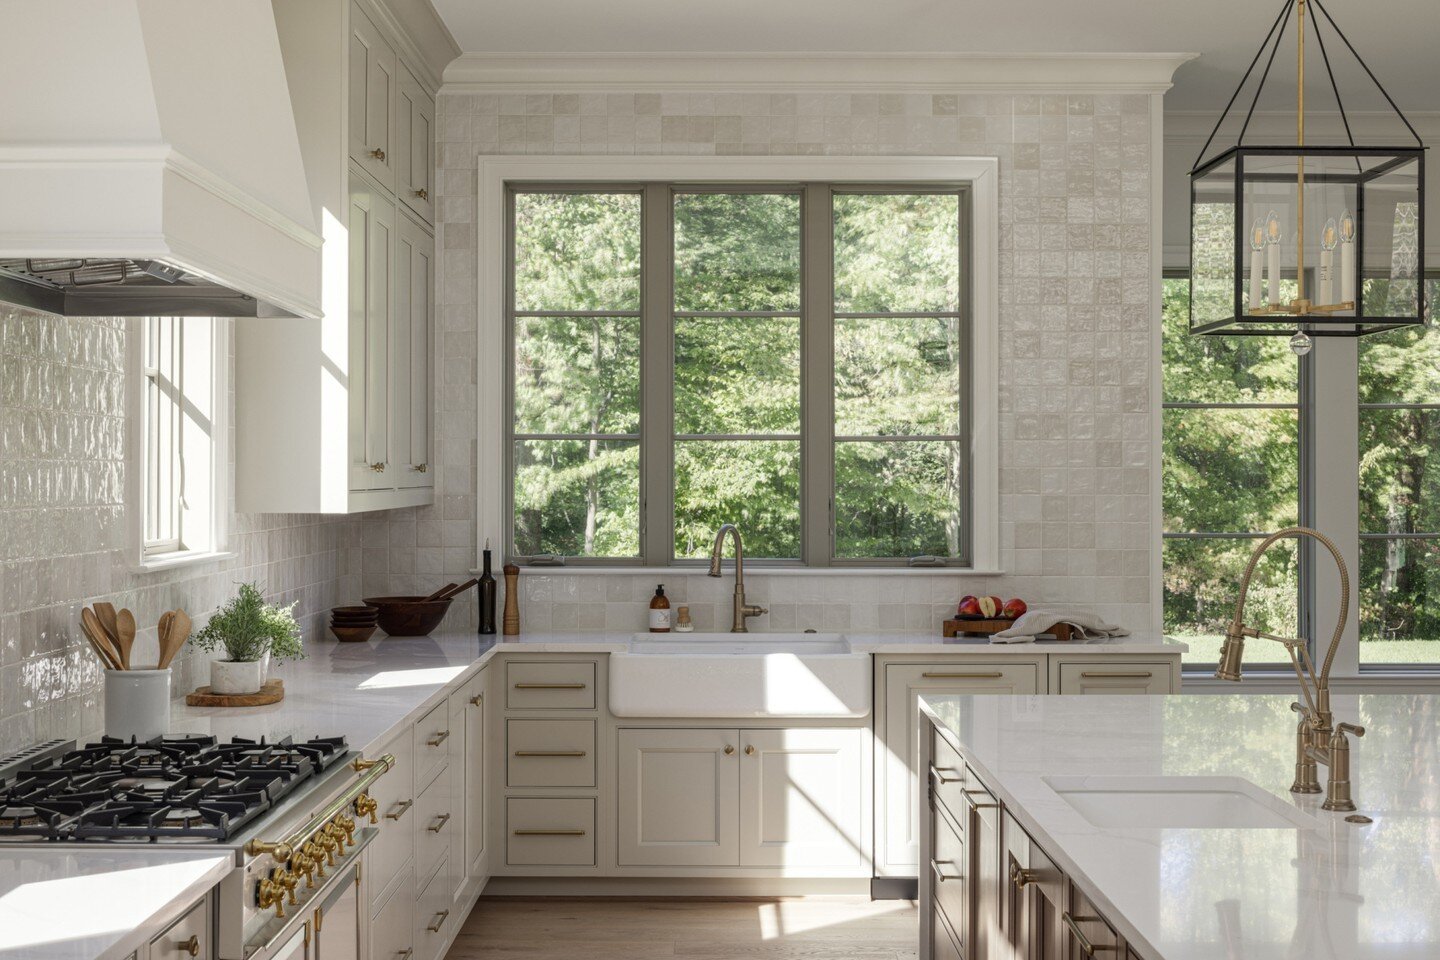 Transform your kitchen into a timeless masterpiece!  With large windows, soft natural light floods the space and creates a beautiful view that will inspire you every day.  And one of our favorite features for a classic and elegant look is a French ra